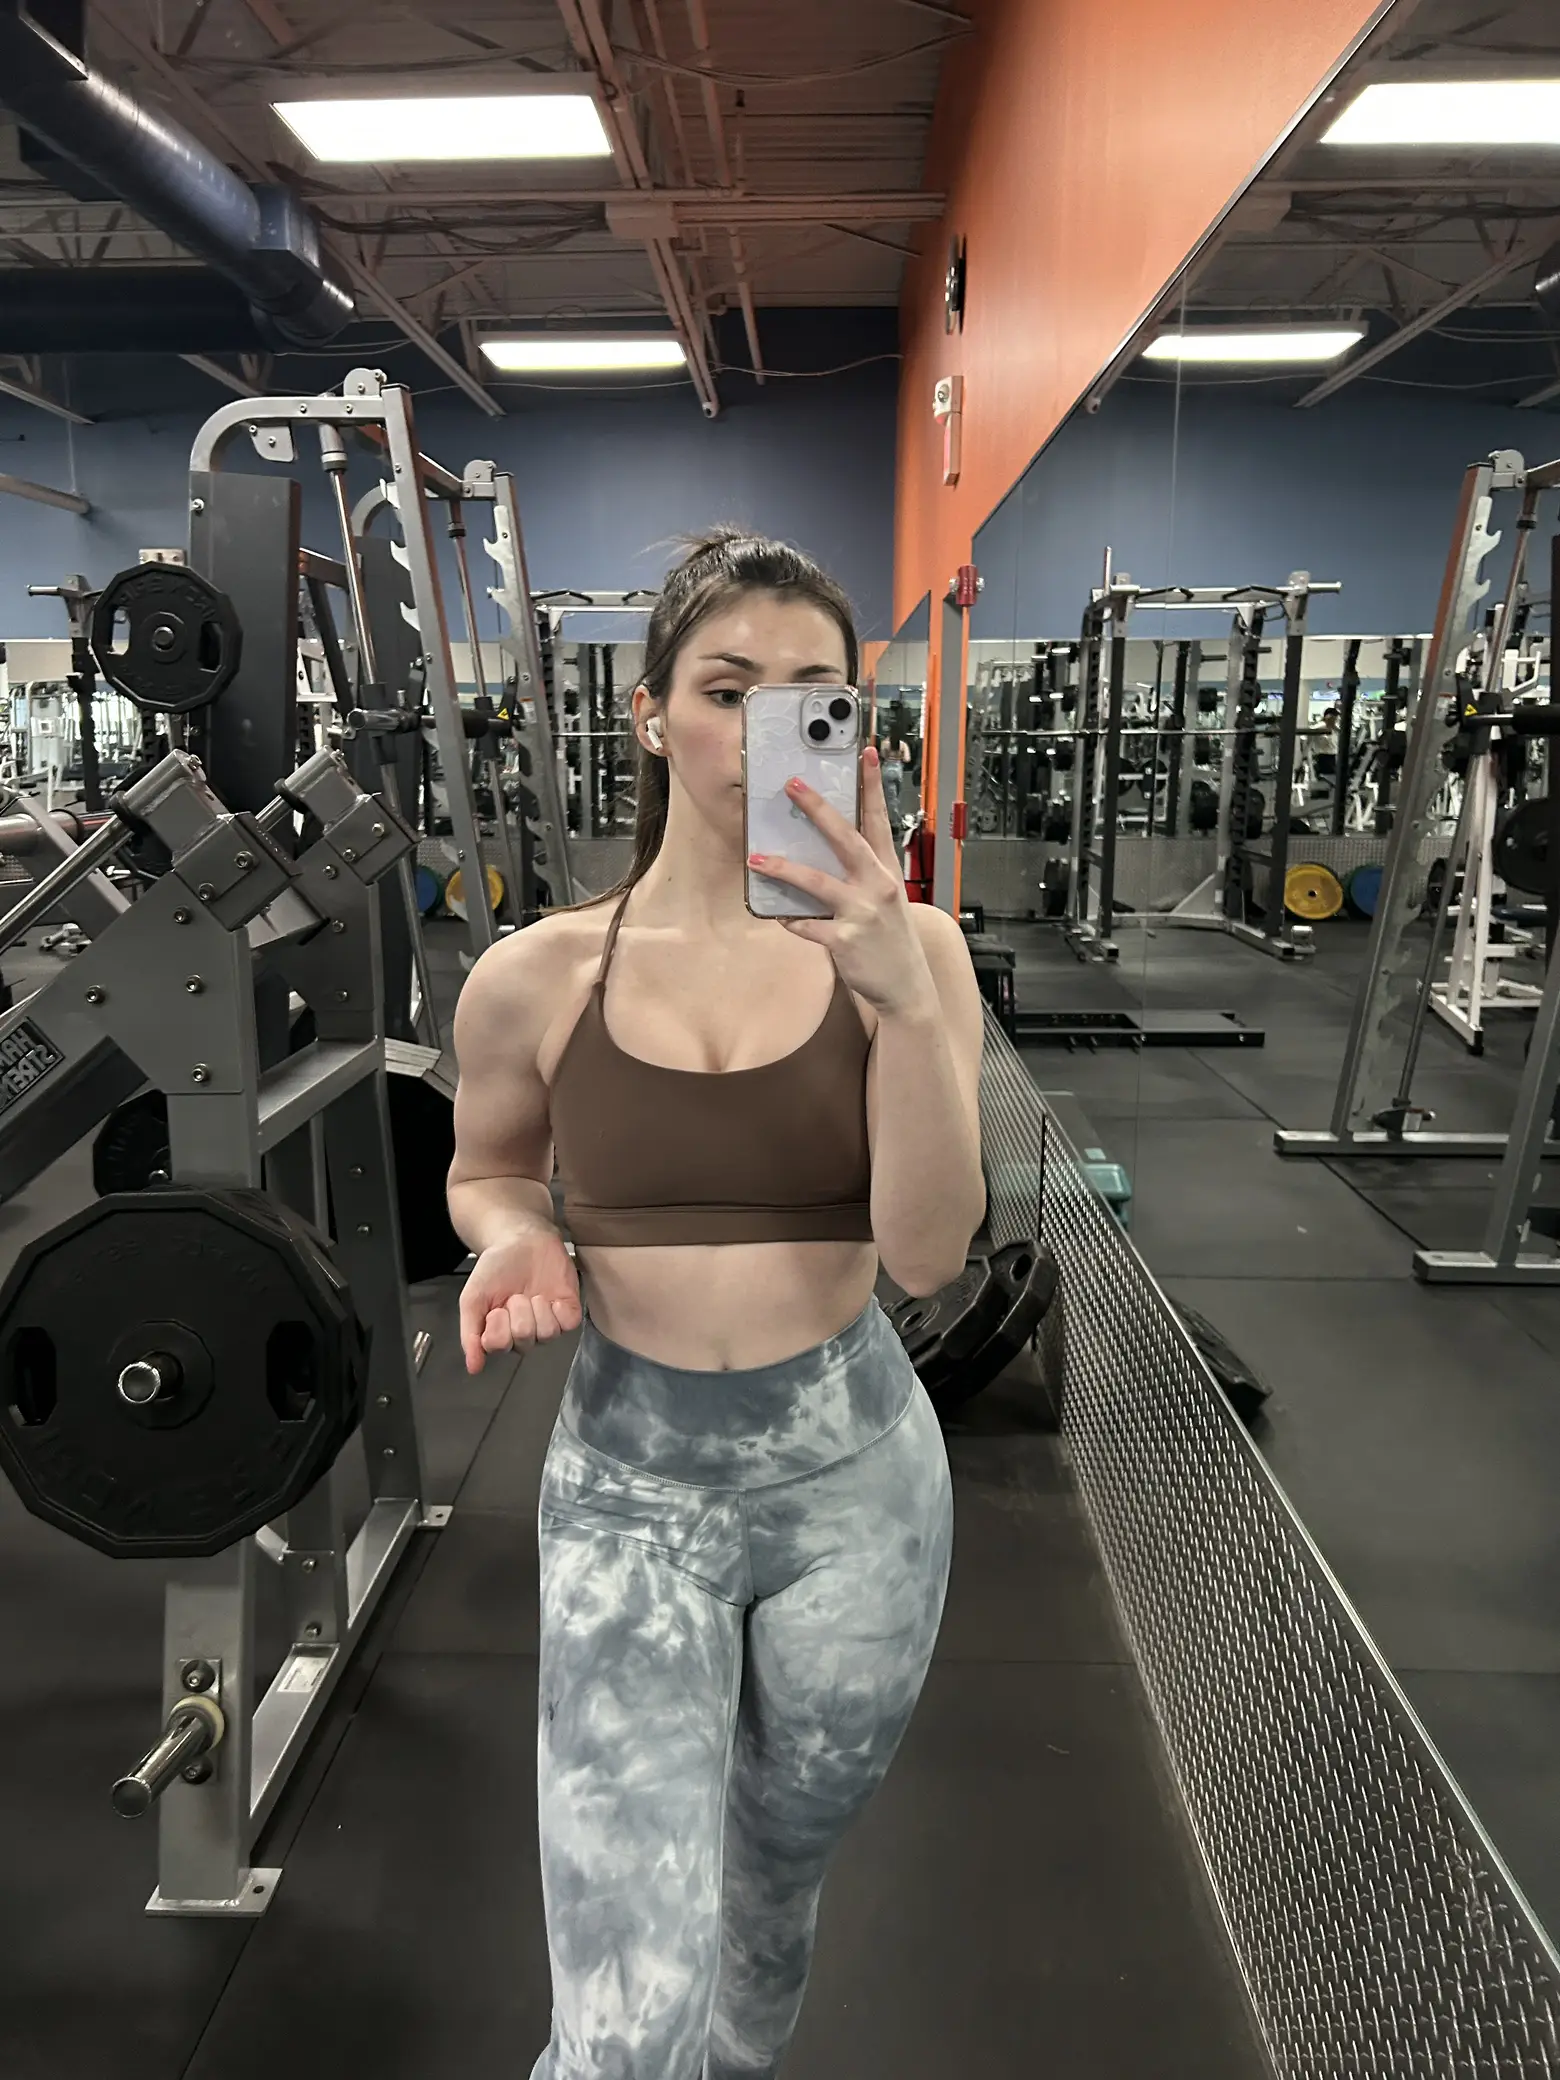 Gym fit inspo from my last few lifts 🫶🏽